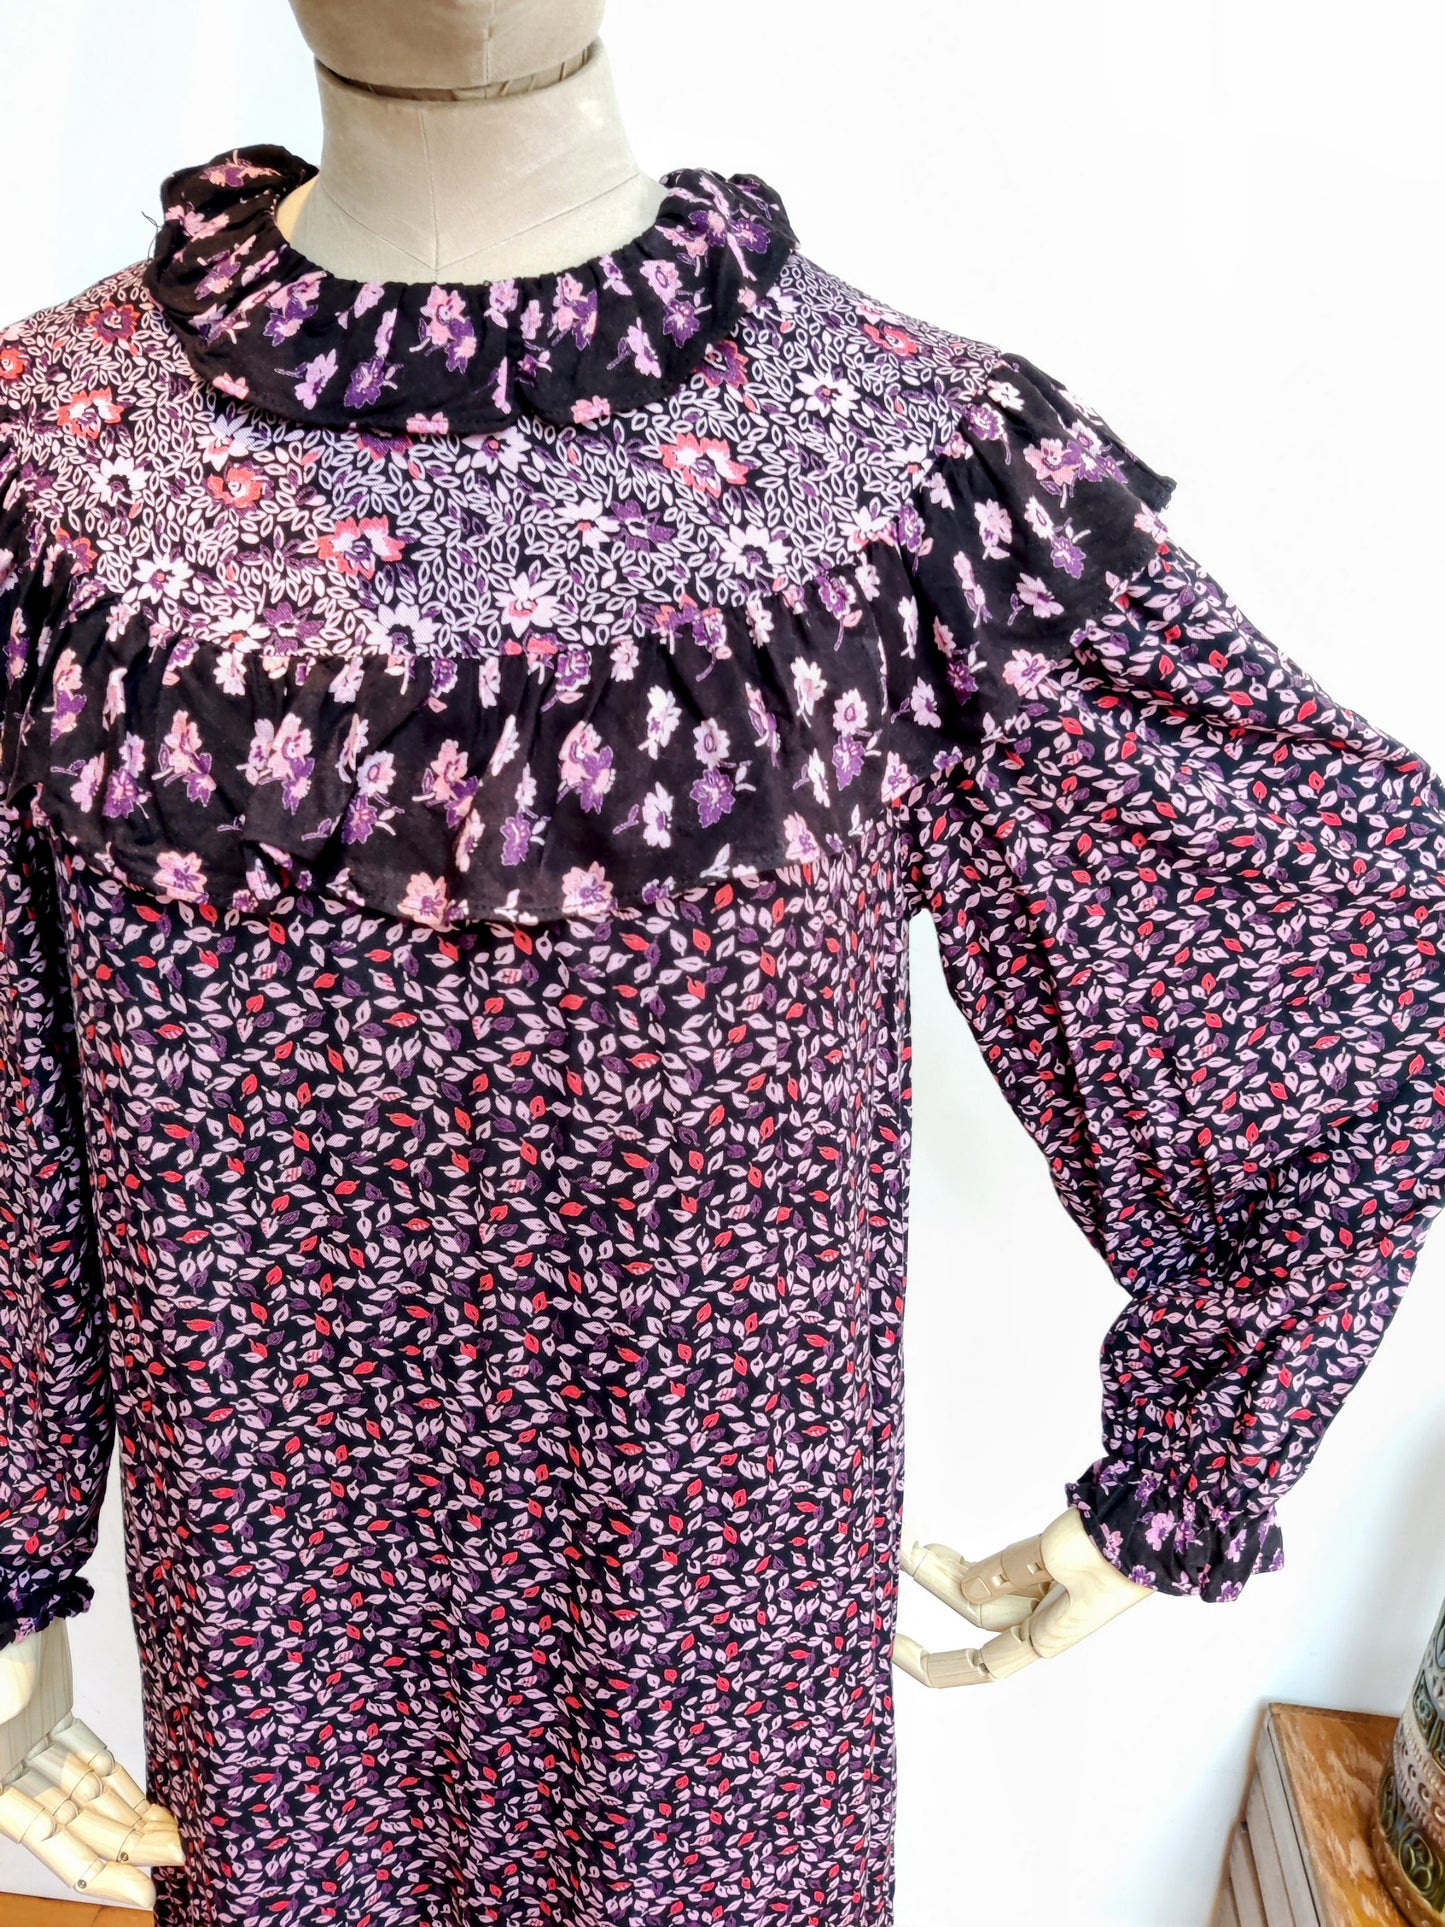 Ditsy print vintage dress with pink and purple floral print